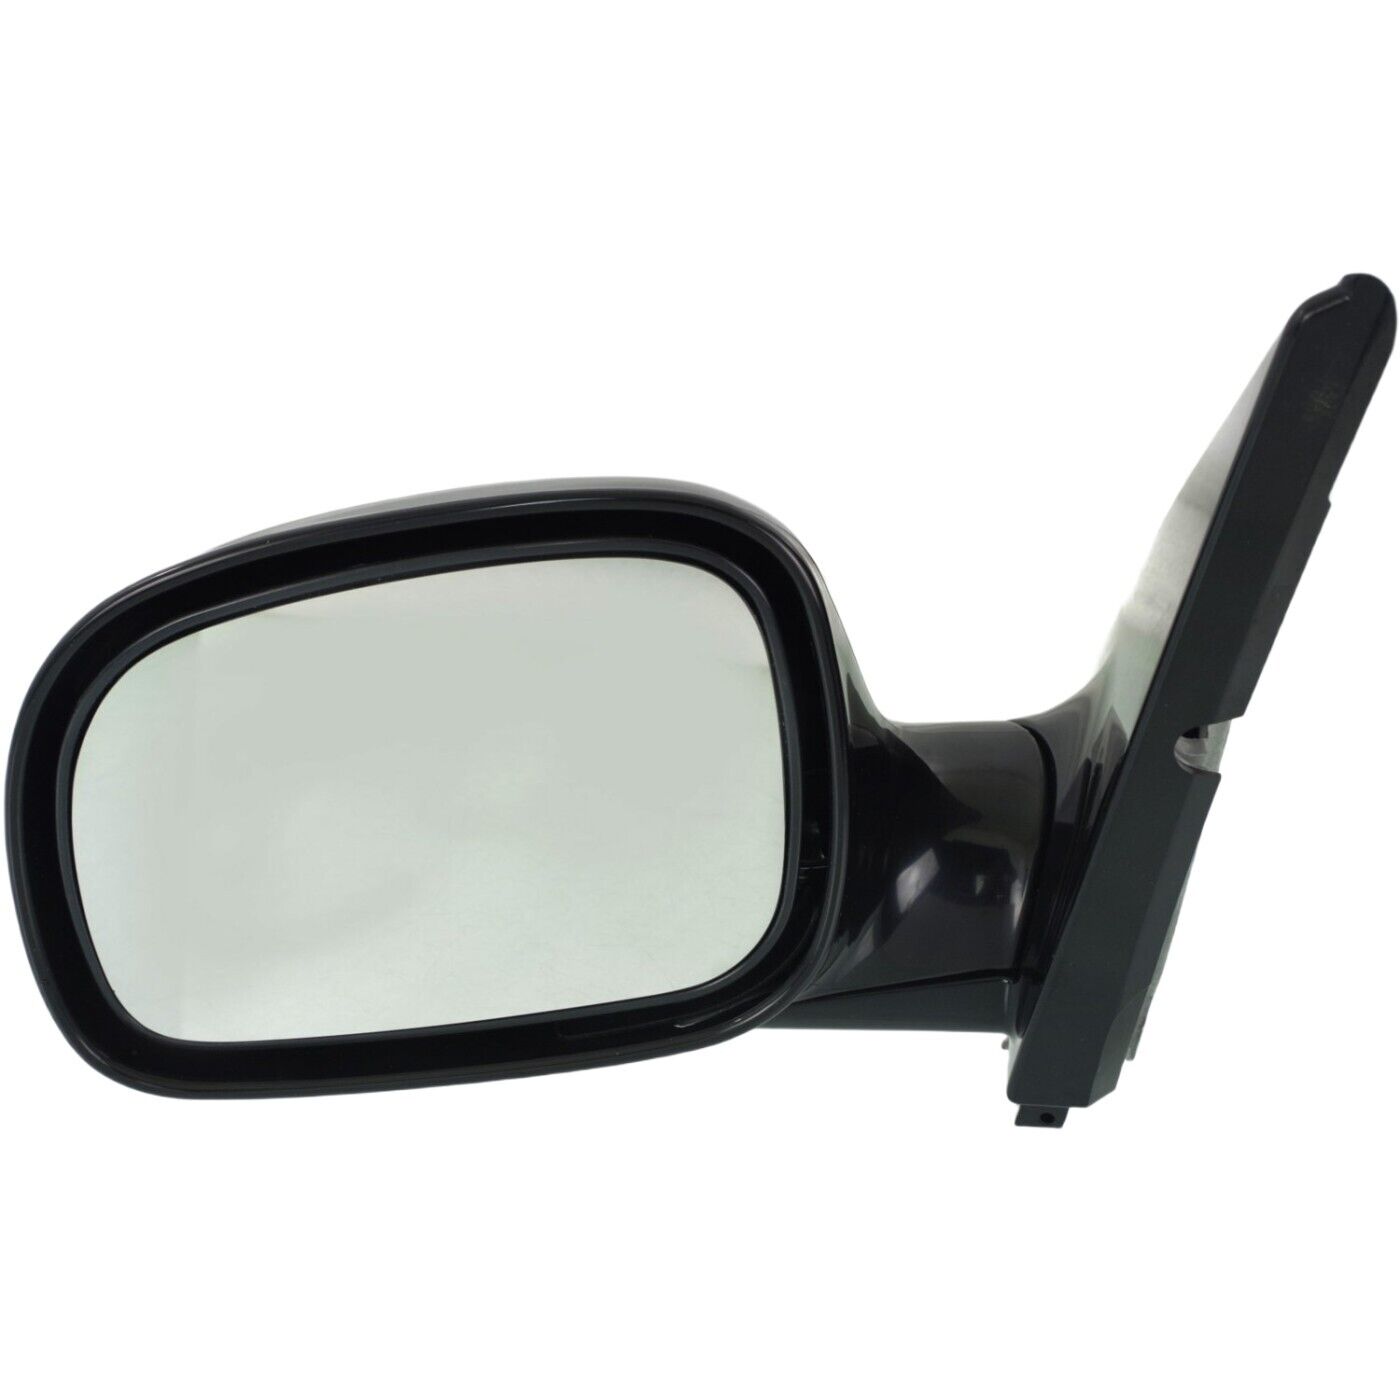 Manual Mirror For 1996-2000 Plymouth Grand Voyager Left Manual Folding Paintable